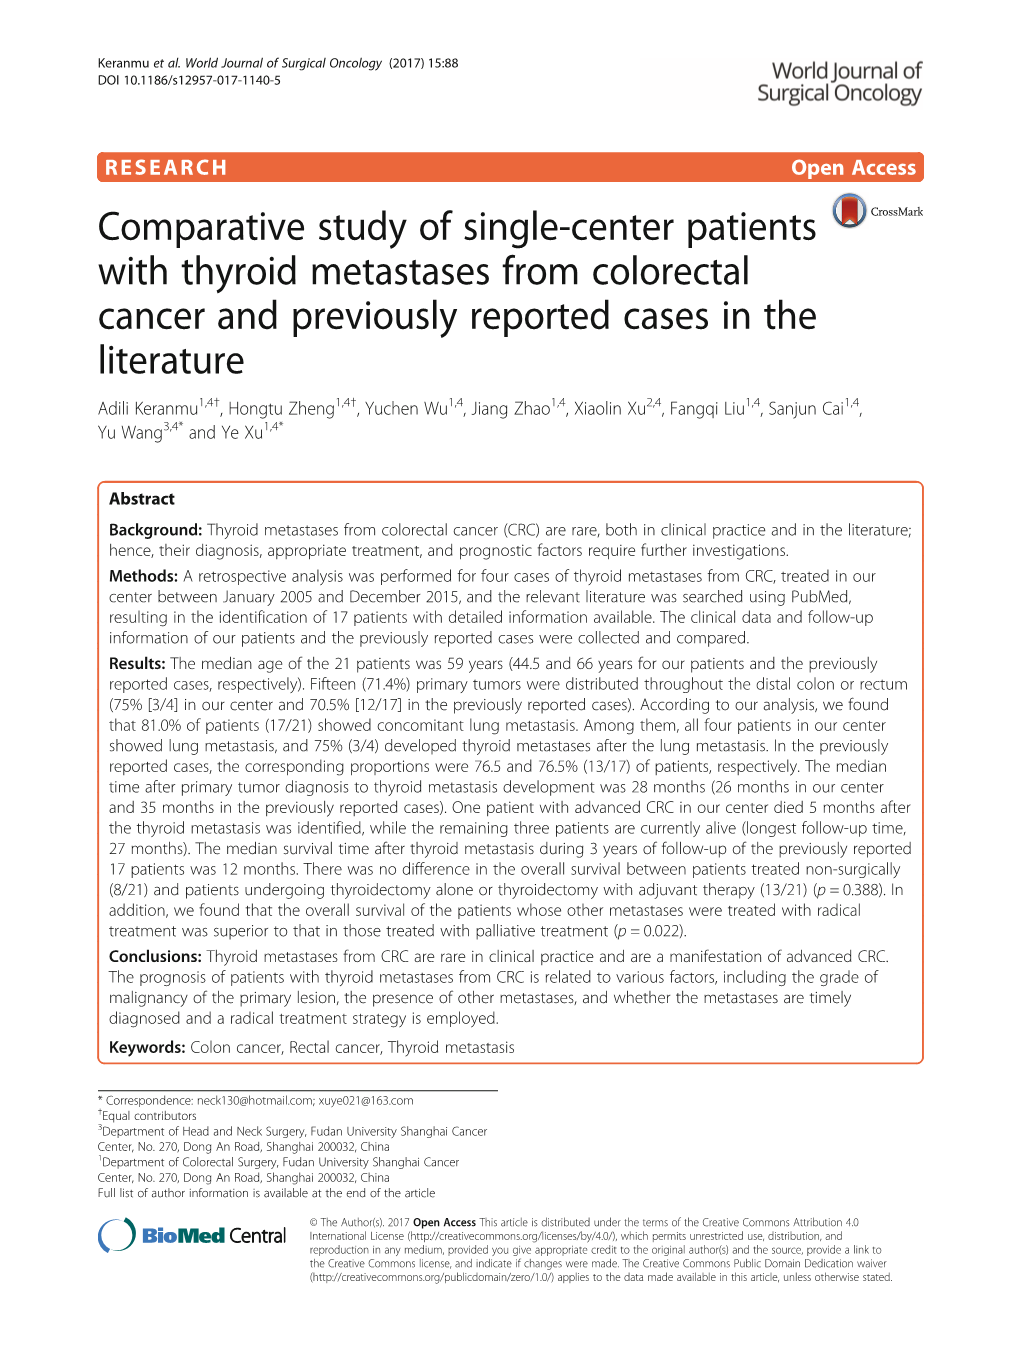 Comparative Study of Single-Center Patients with Thyroid Metastases